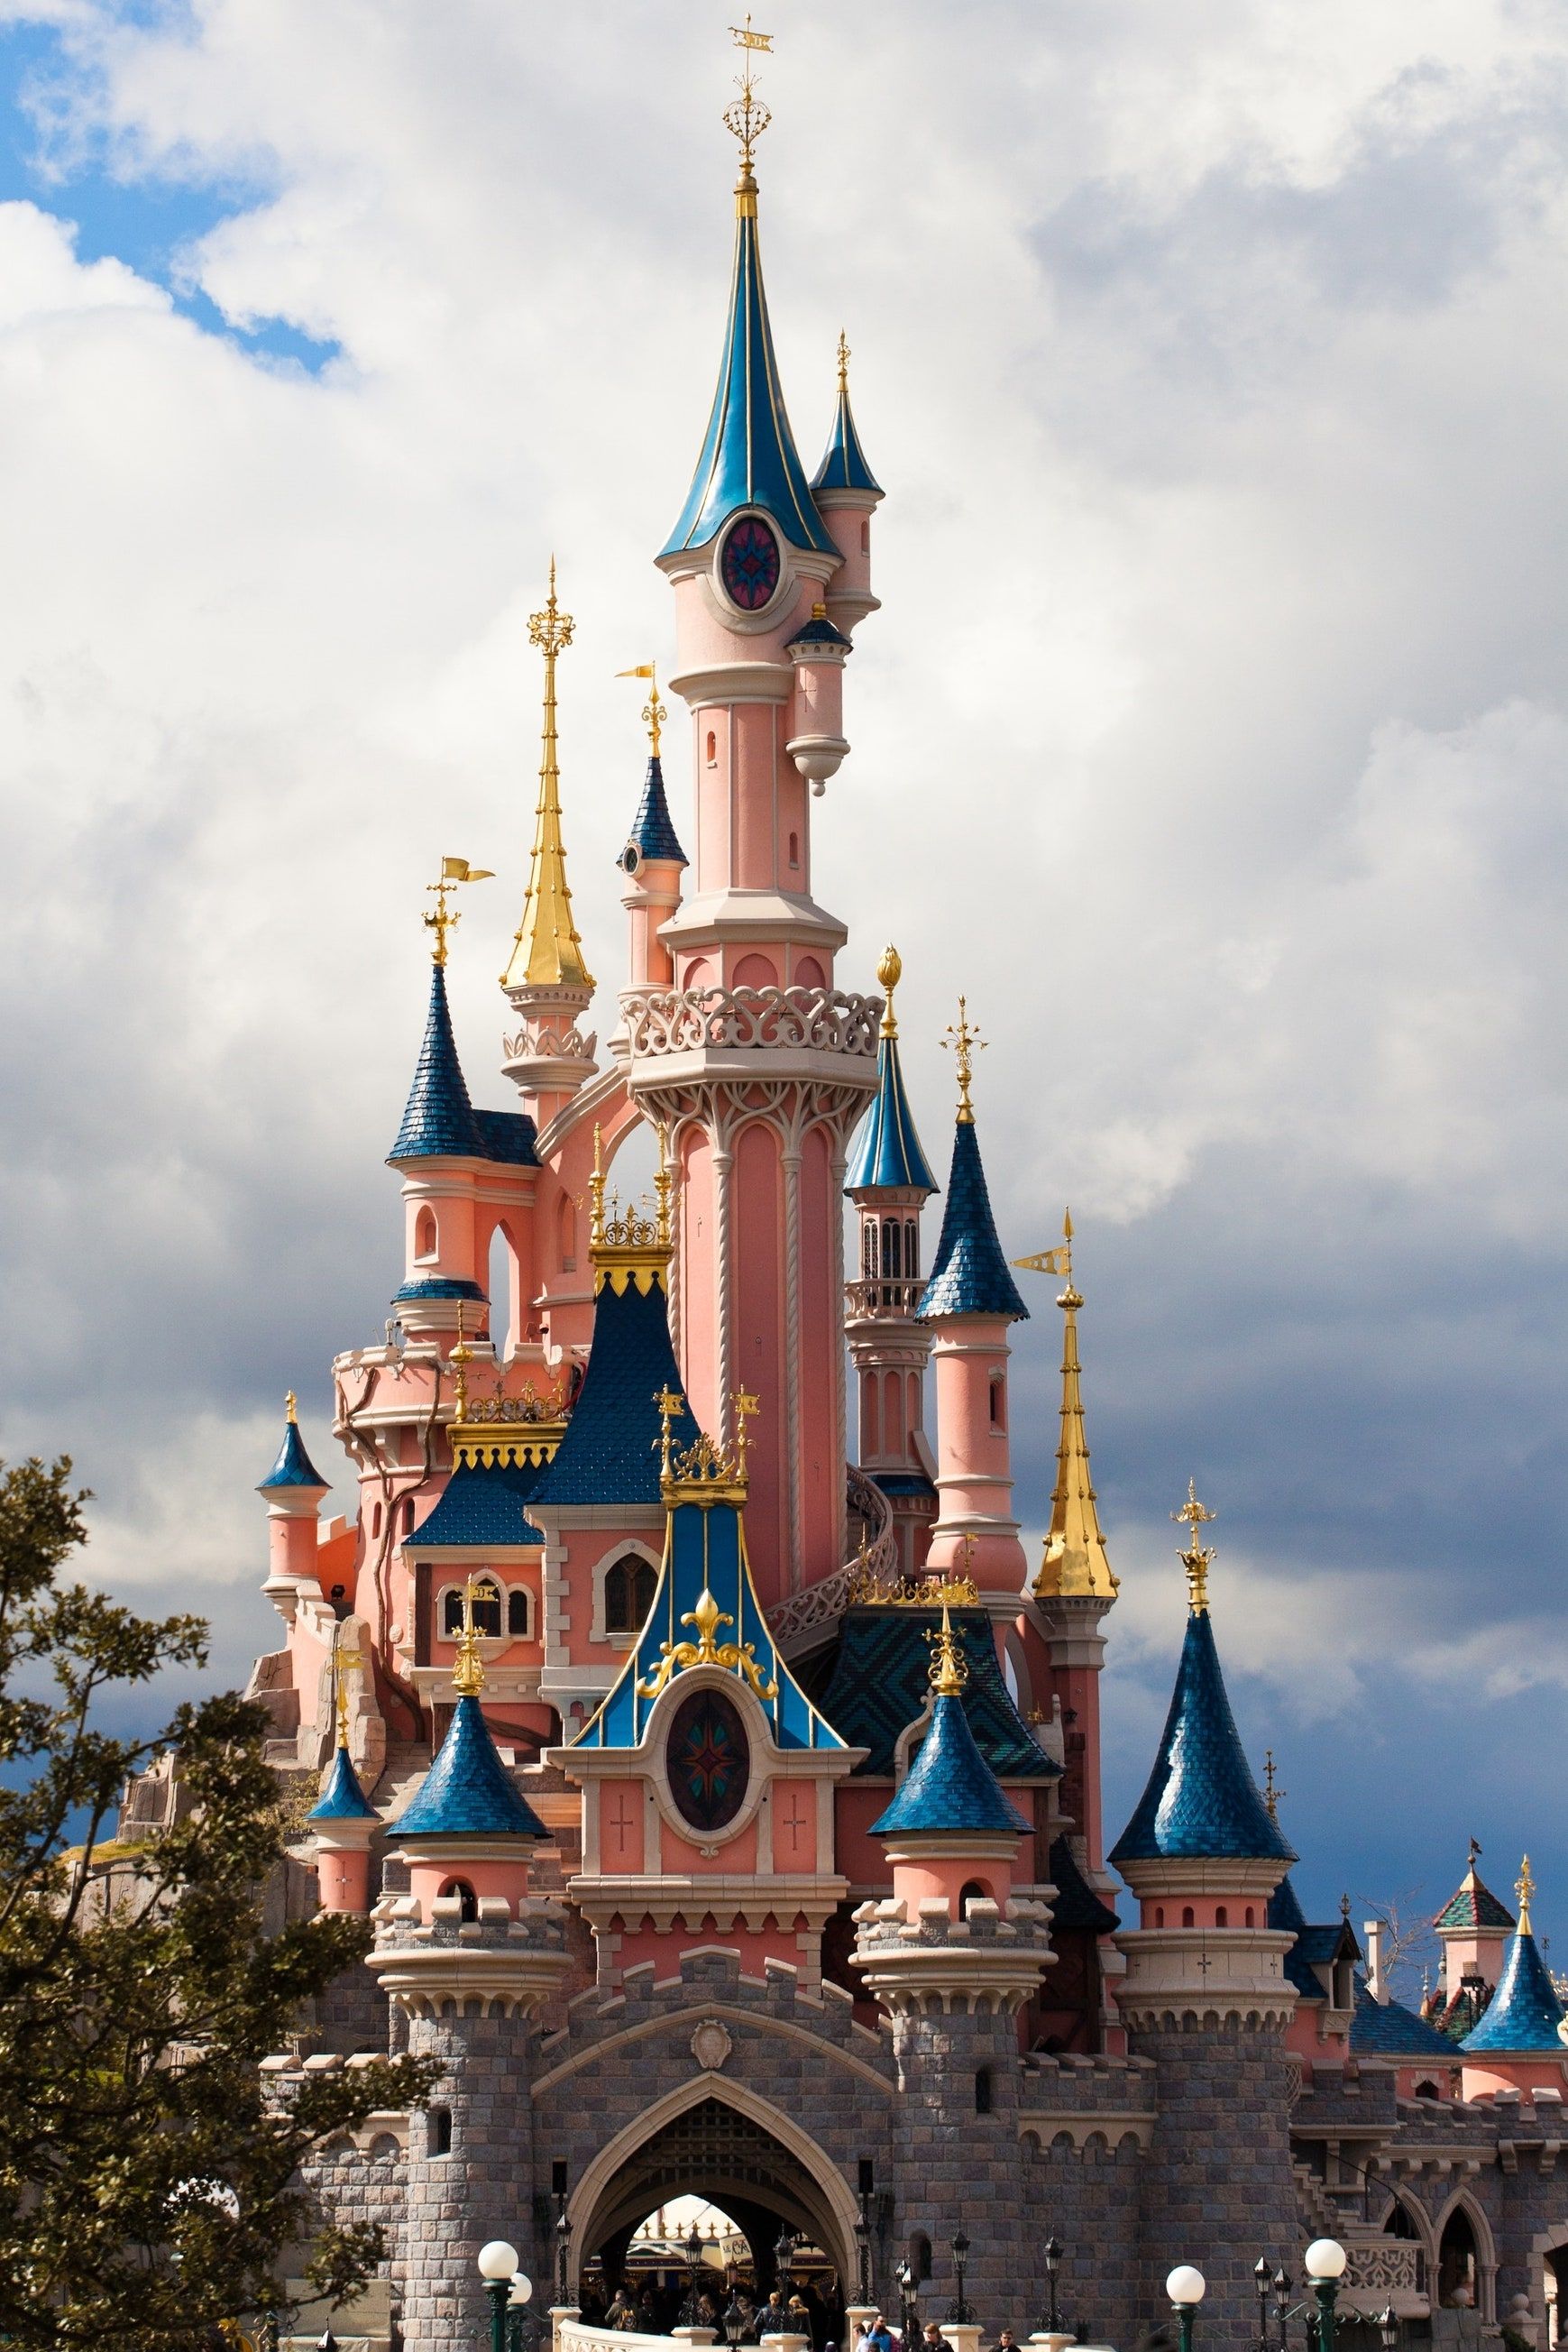 Disneyland Paris has launched a website full of fun activities to do at home